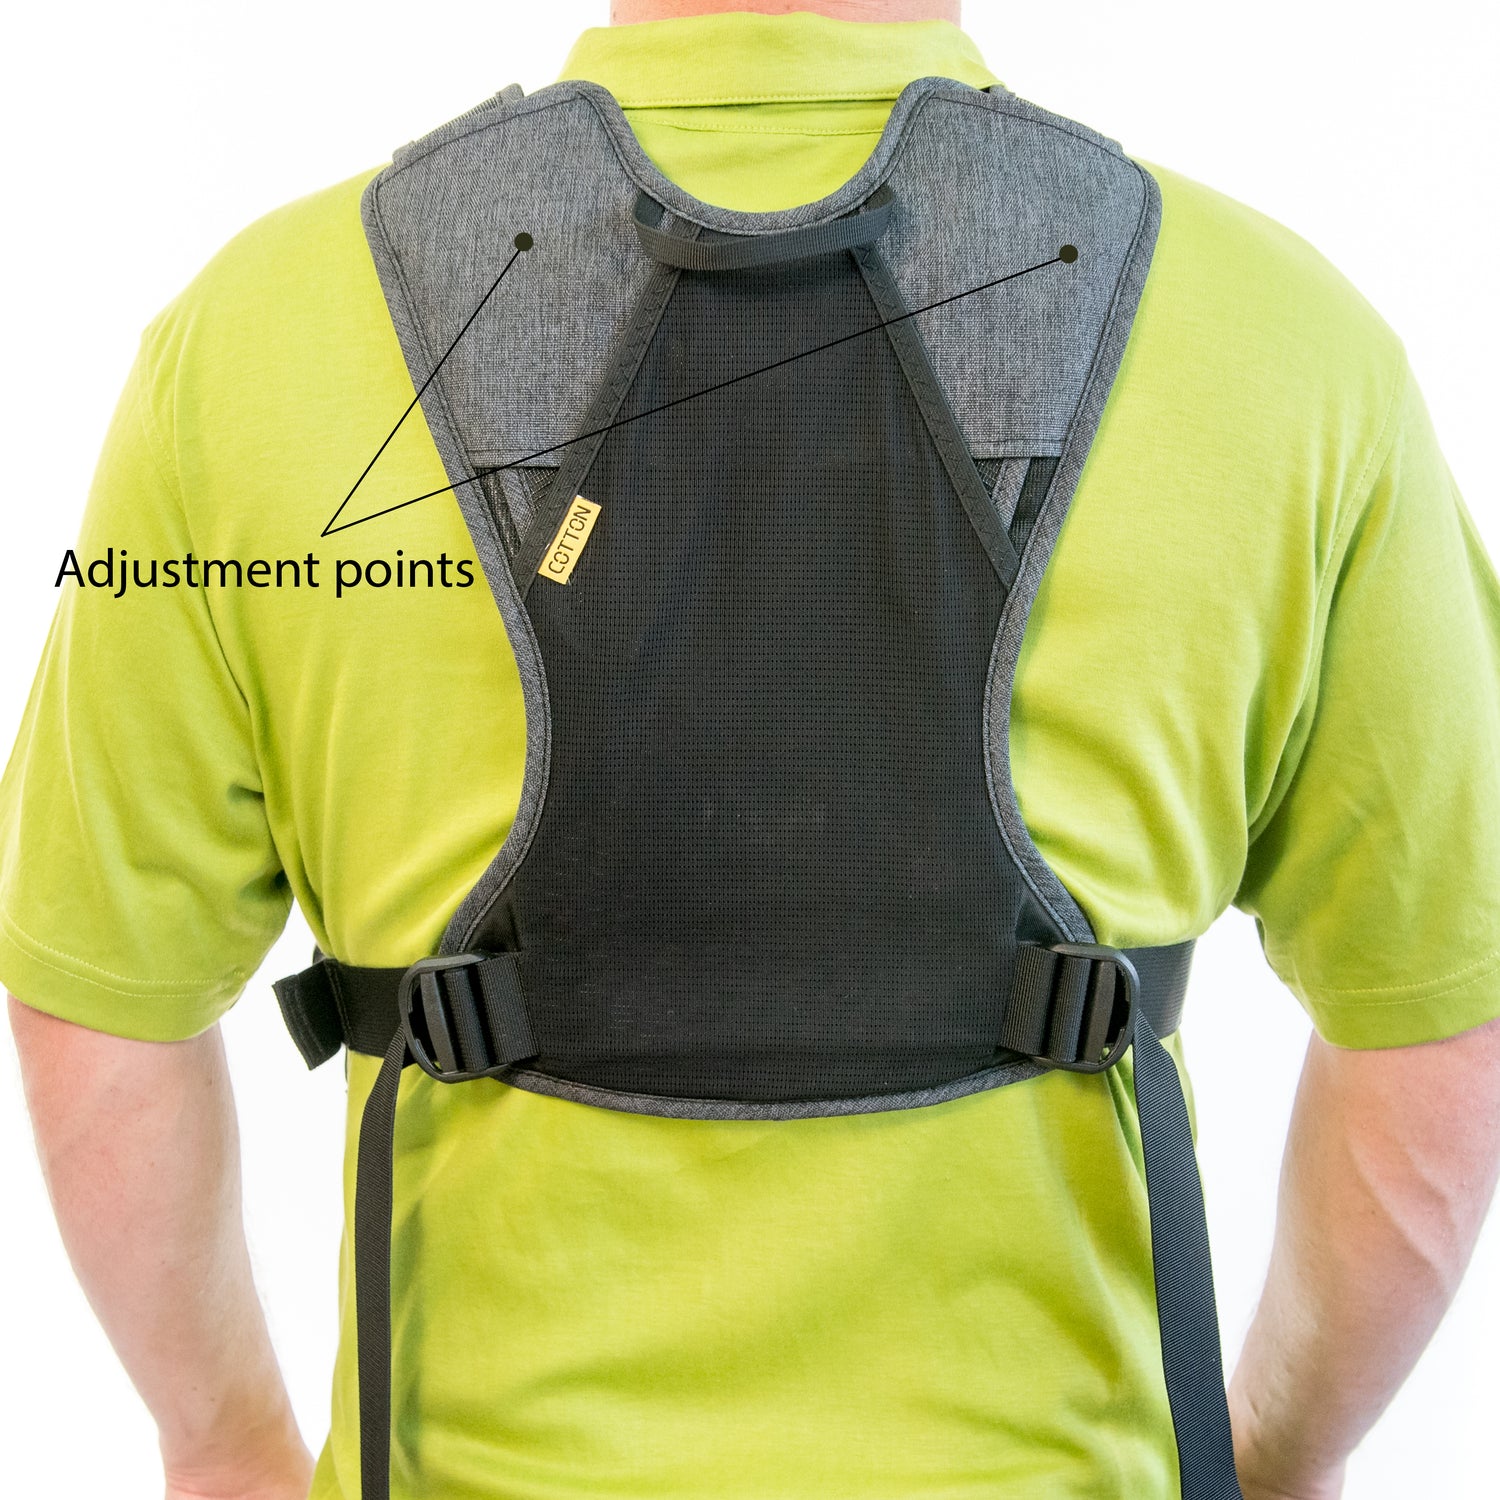 Instructional photo of man wearing a G3 camera harness with adjustable shoulder straps